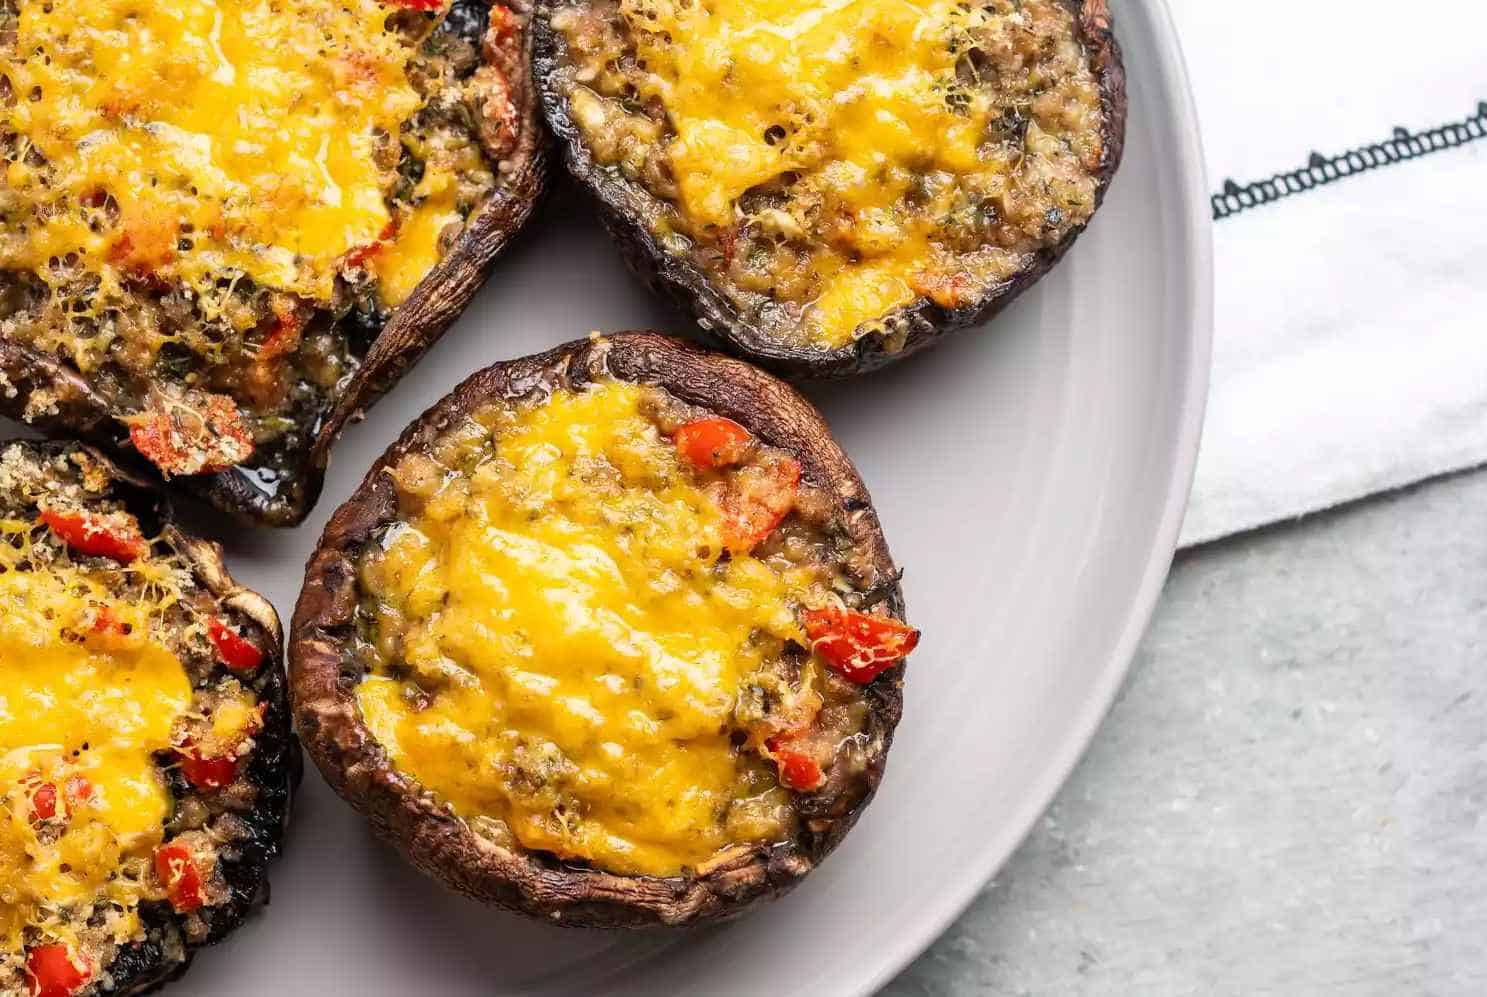 Grilled Herb and Cheese Stuffed Mushroom